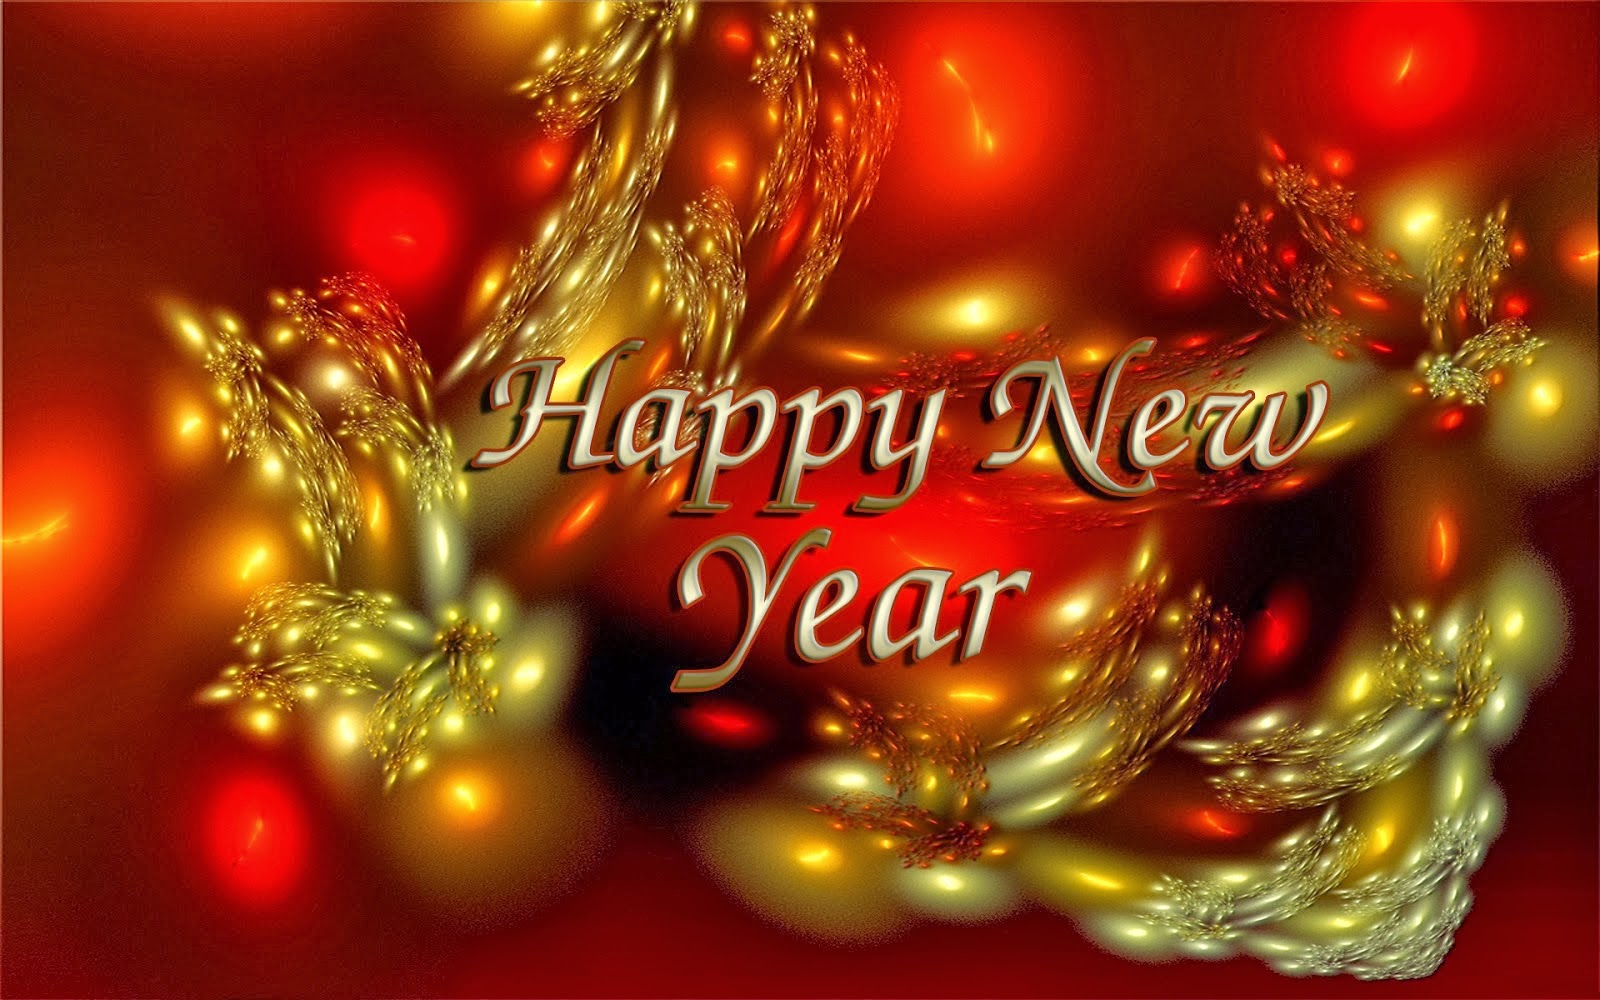 Free online greeting cards, animated cards, ecards, postcards & egreetings: New year Greeting